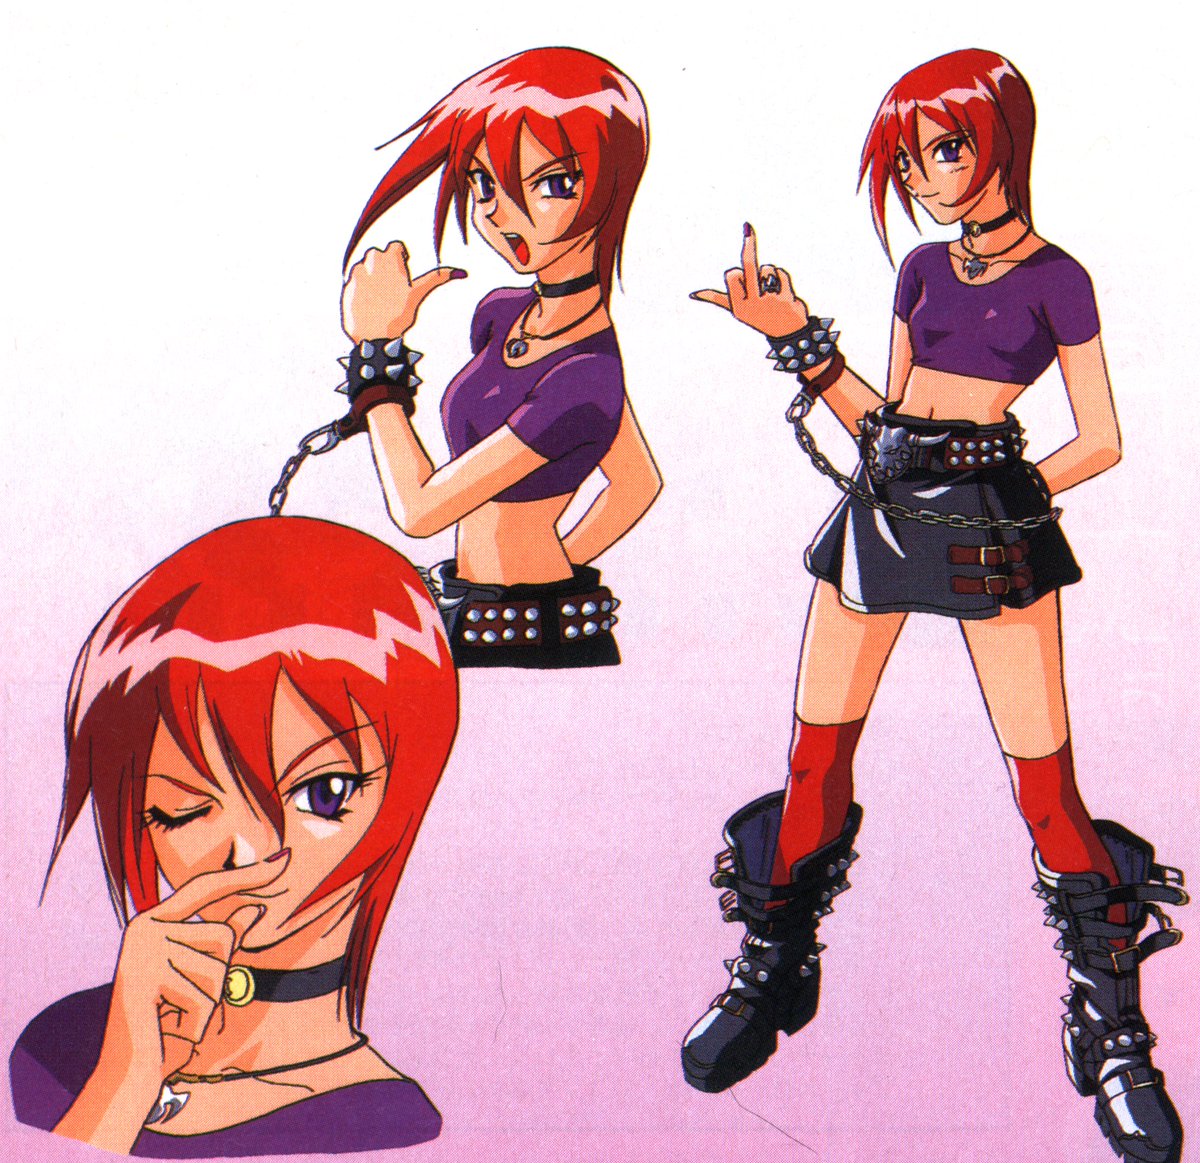 Its Fantastic Arcade Scans And Translations On Twitter Character Art For Jalecos 1997